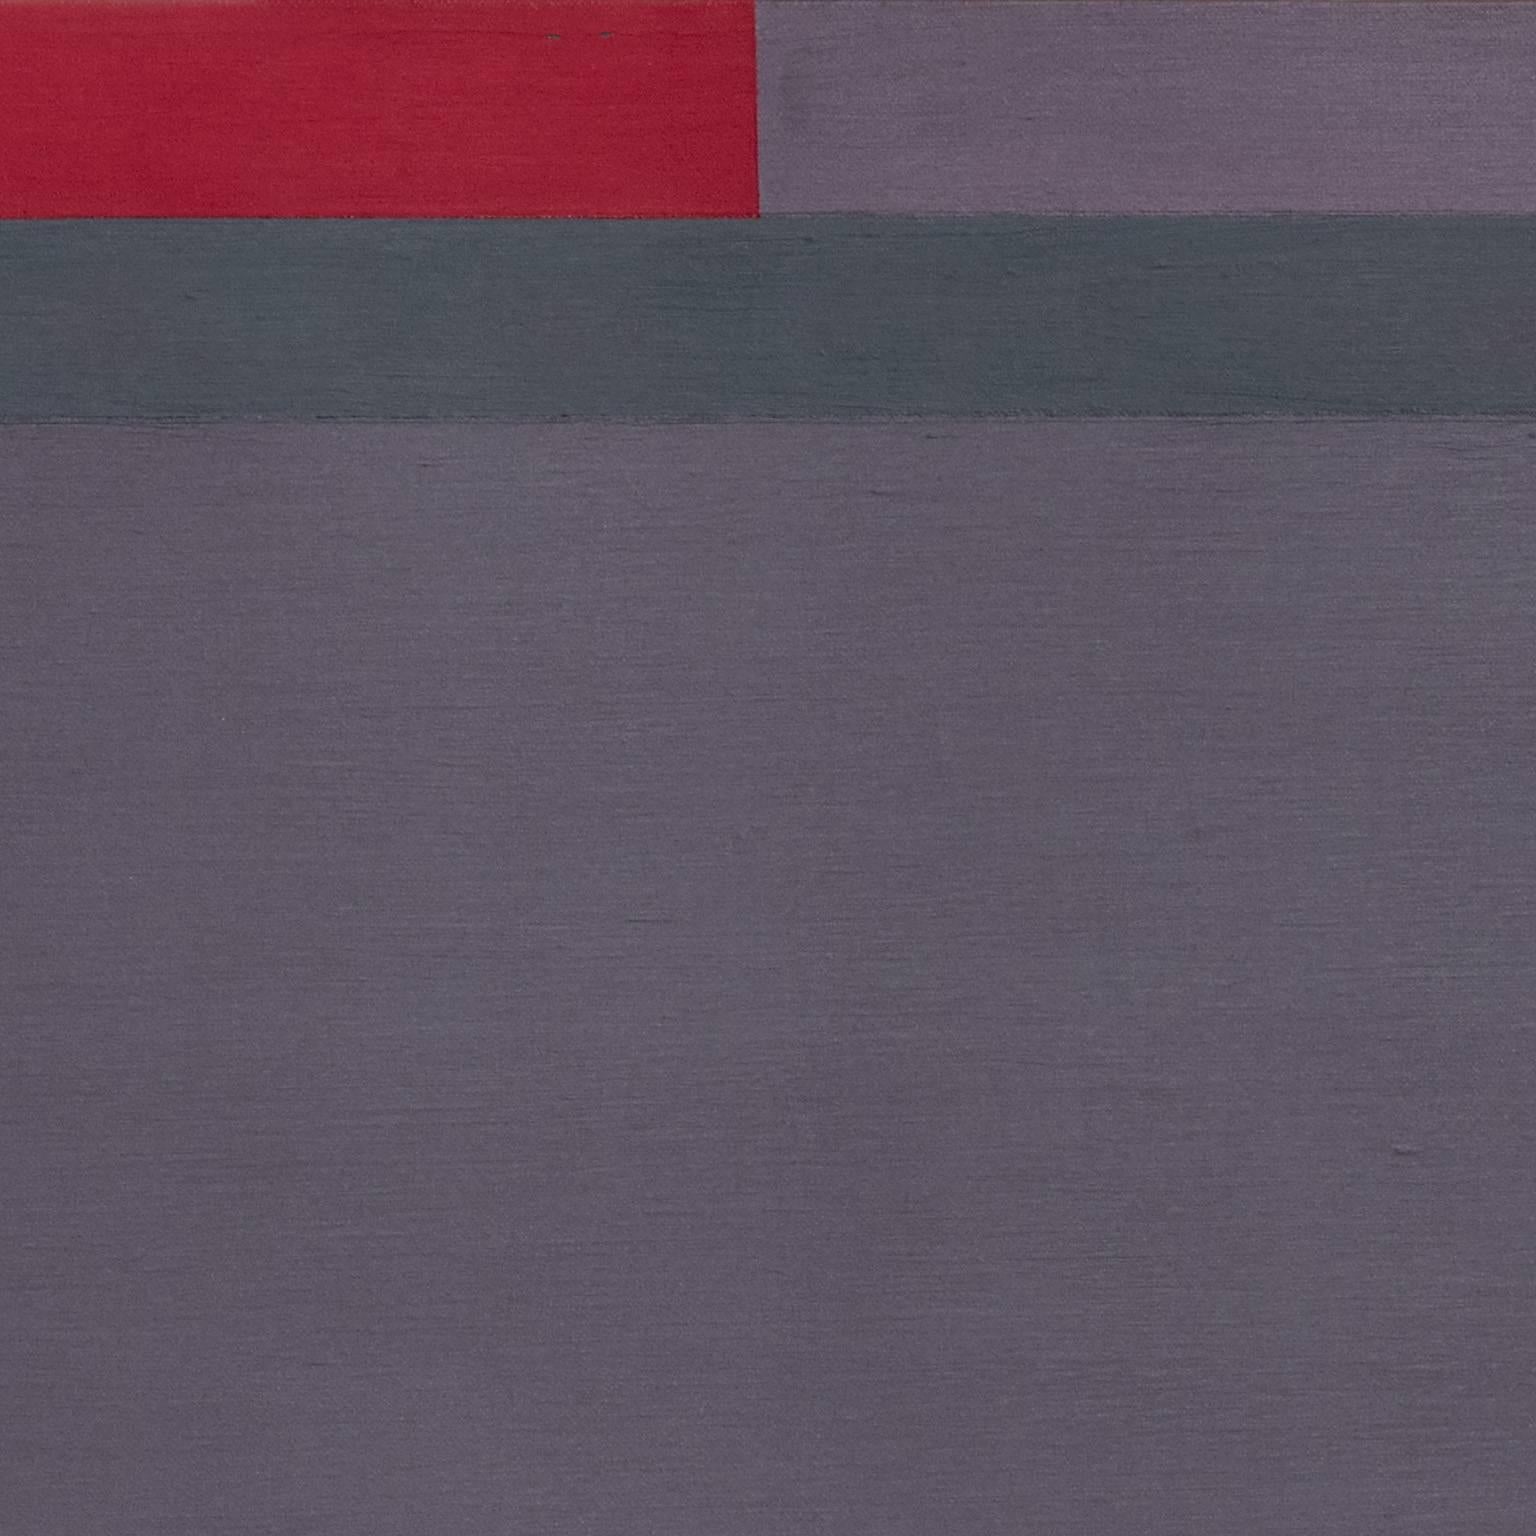 This work by Martin Canin is a 30.25 x 60.25 inch horizontal color-field oil painting from 1974. Color is freed from objective context and becomes the subject in itself.  A deep velvety purple color field dialogues with green and red elements at the